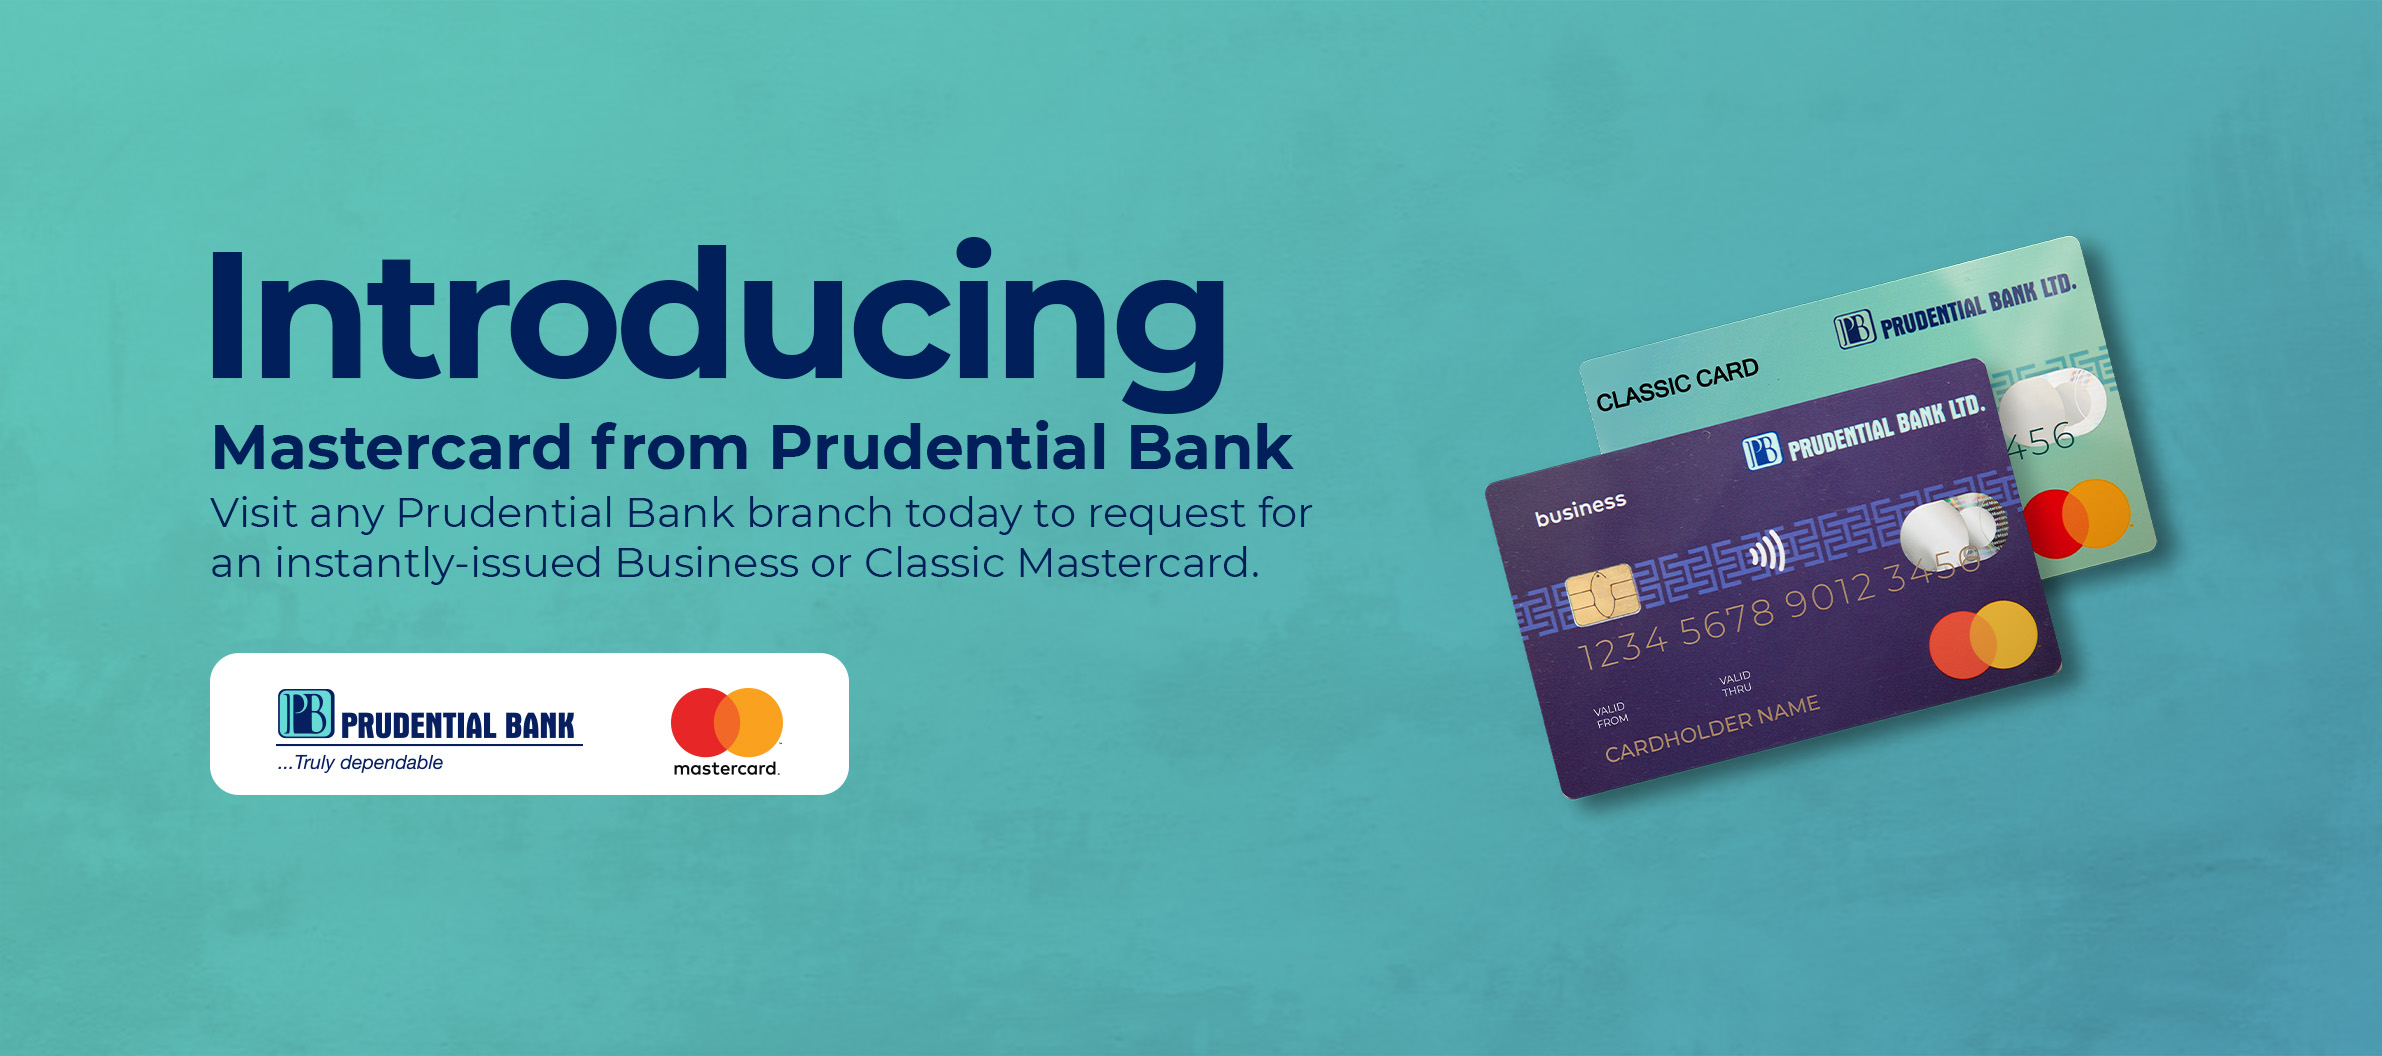 Introducing MasterCard from Prudential Bank